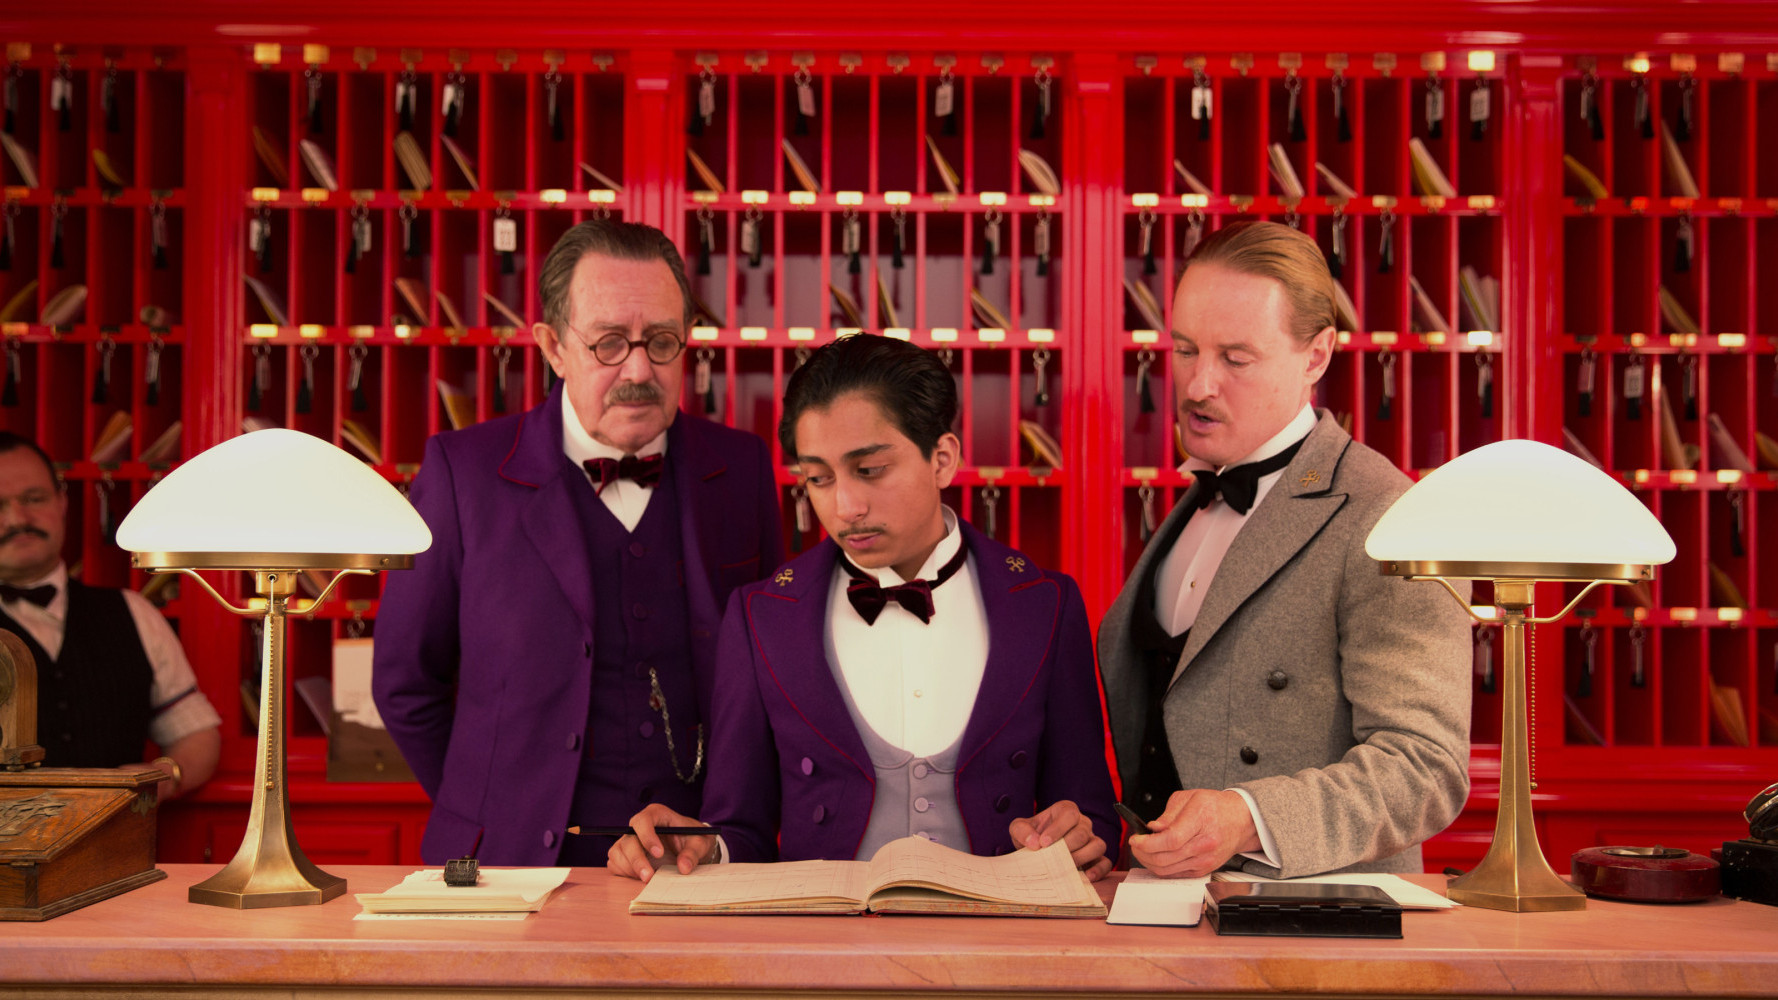 Review phim The Grand Budapest Hotel.